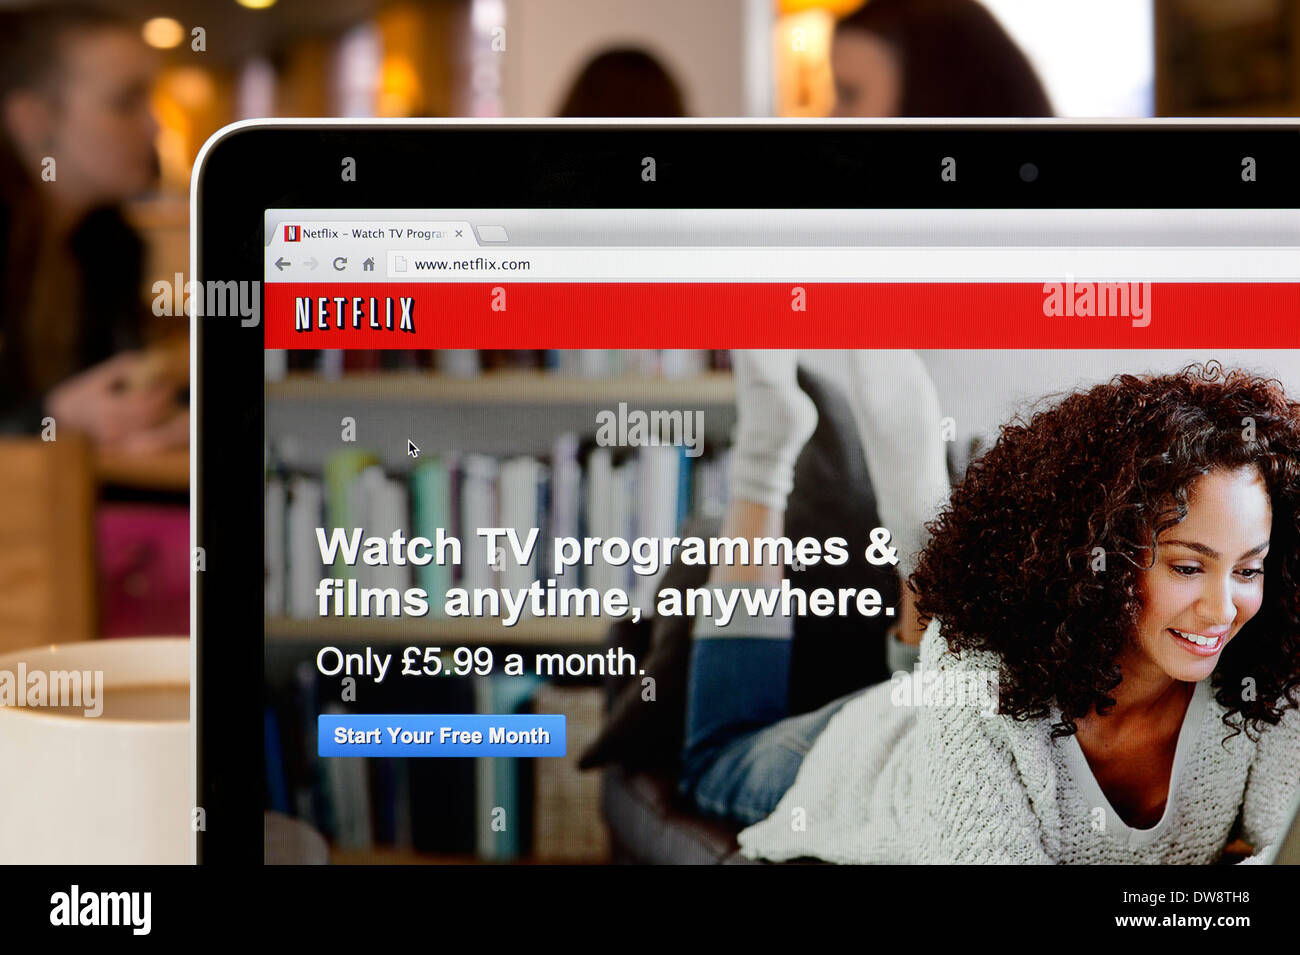 The Netflix website shot in a coffee shop environment (Editorial use only: print, TV, e-book and editorial website). Stock Photo